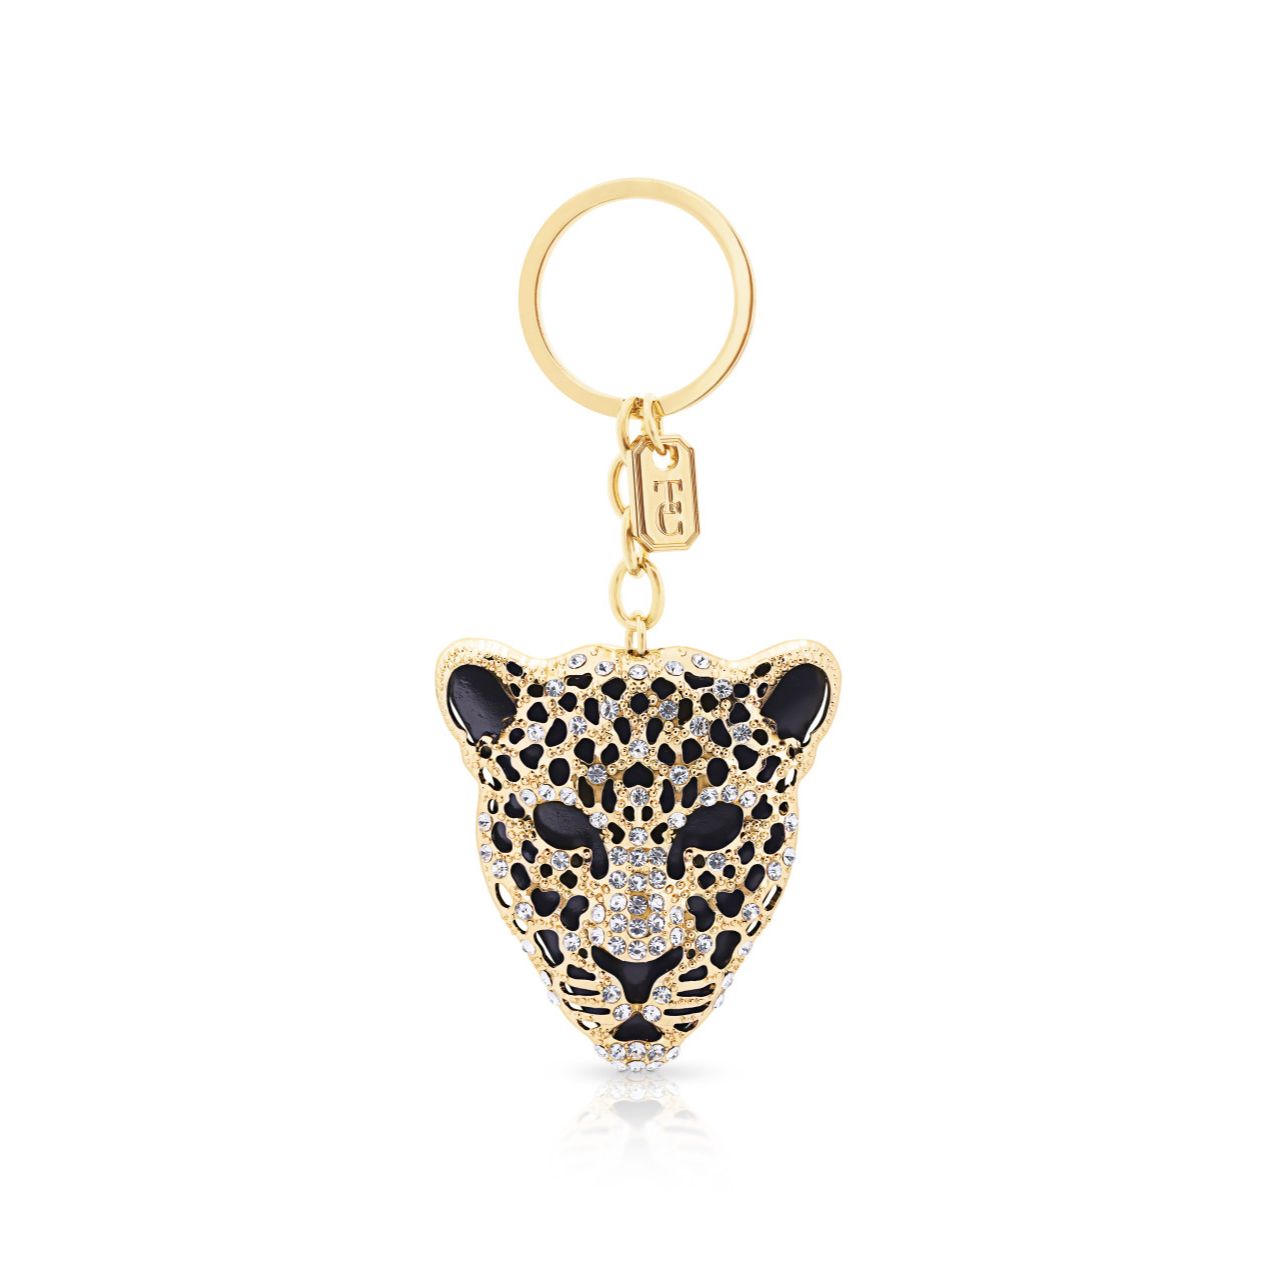 Panther Keyring by Tipperary Crystal  Transform your keys to a fashion statement with this stunning Panther keyring.